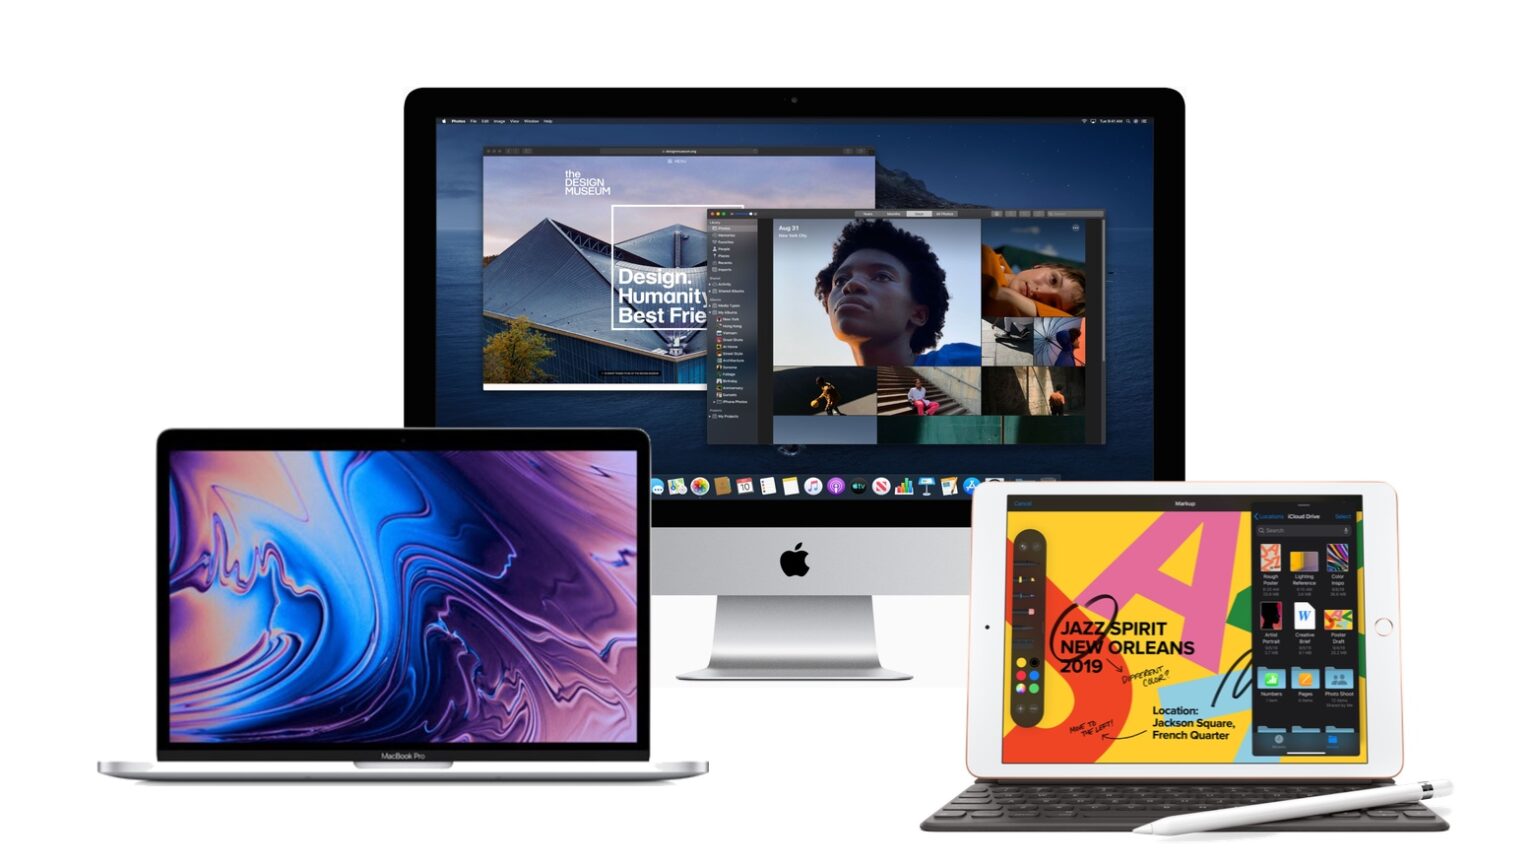 MacBook, iMac and iPad are all computers